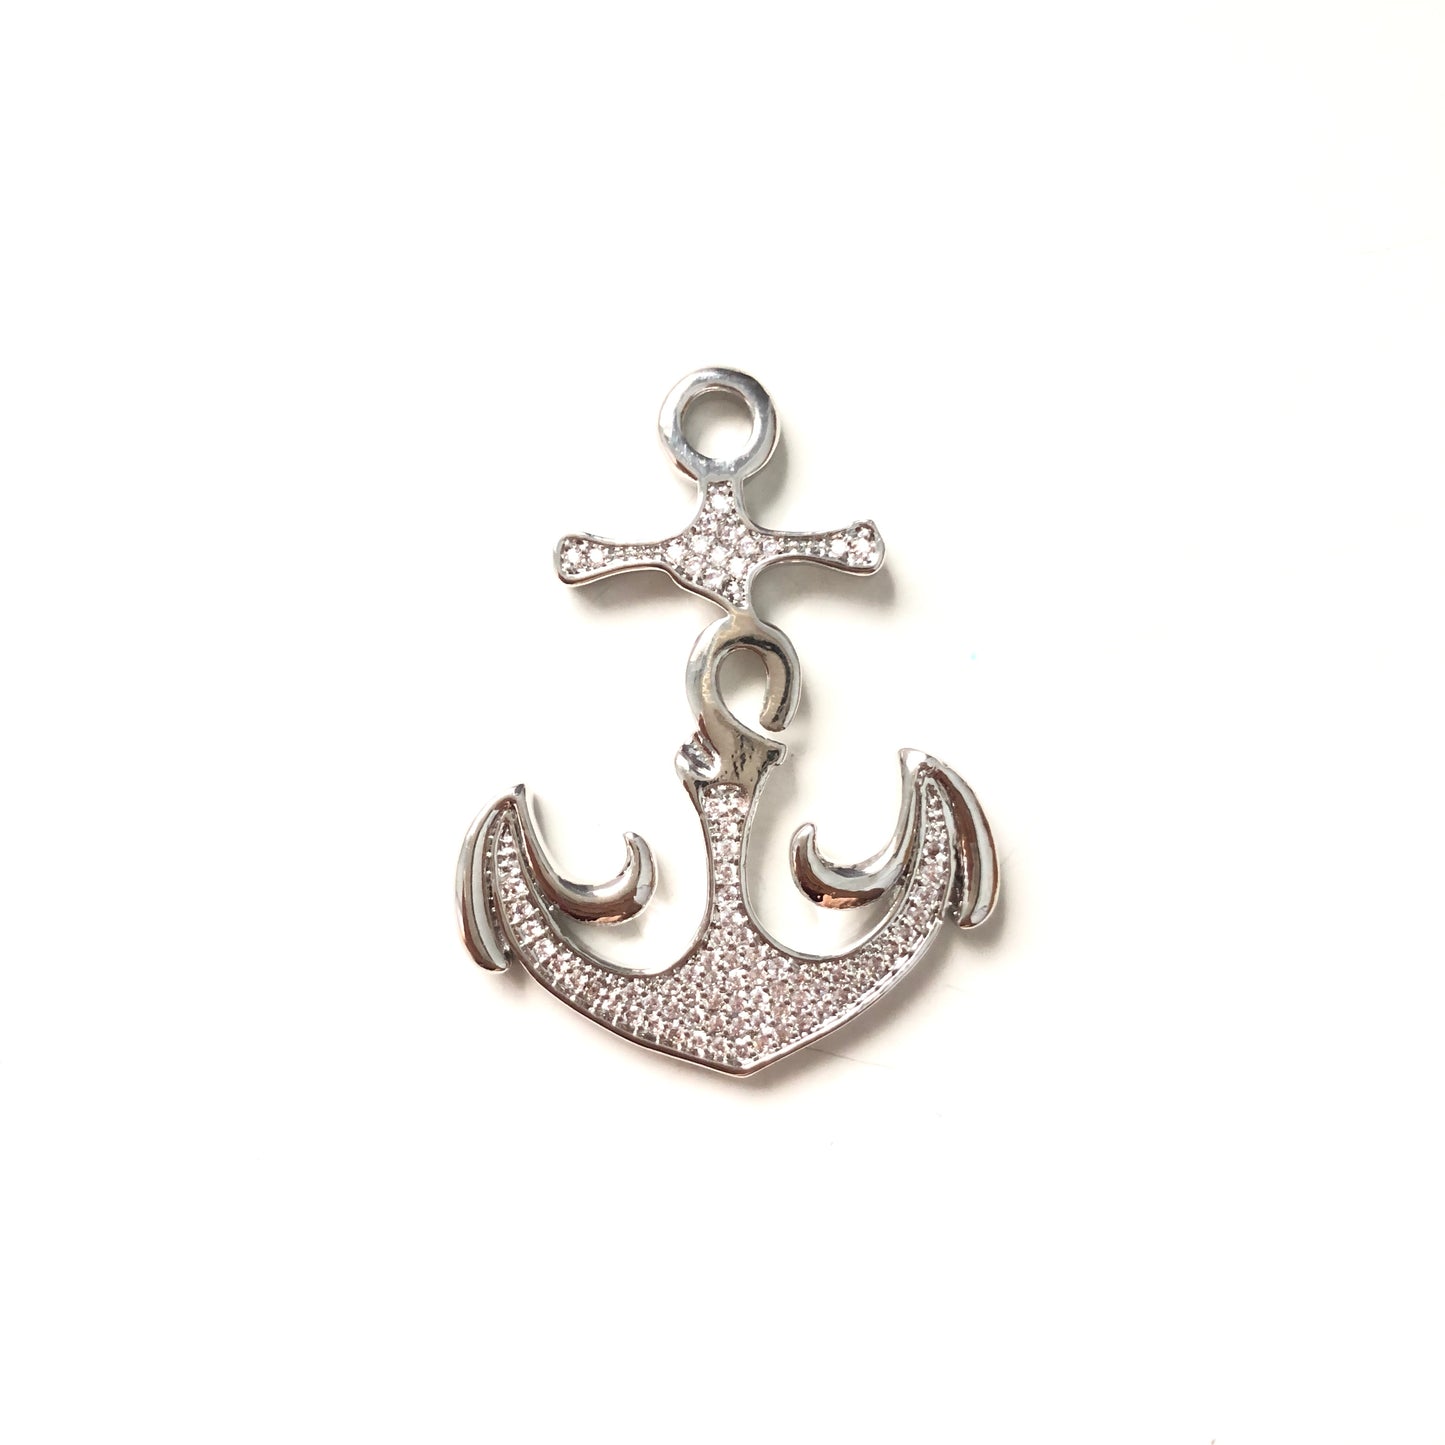 10pcs/lot 40*31mm CZ Paved Anchor Charms Silver CZ Paved Charms Large Sizes Symbols Charms Beads Beyond